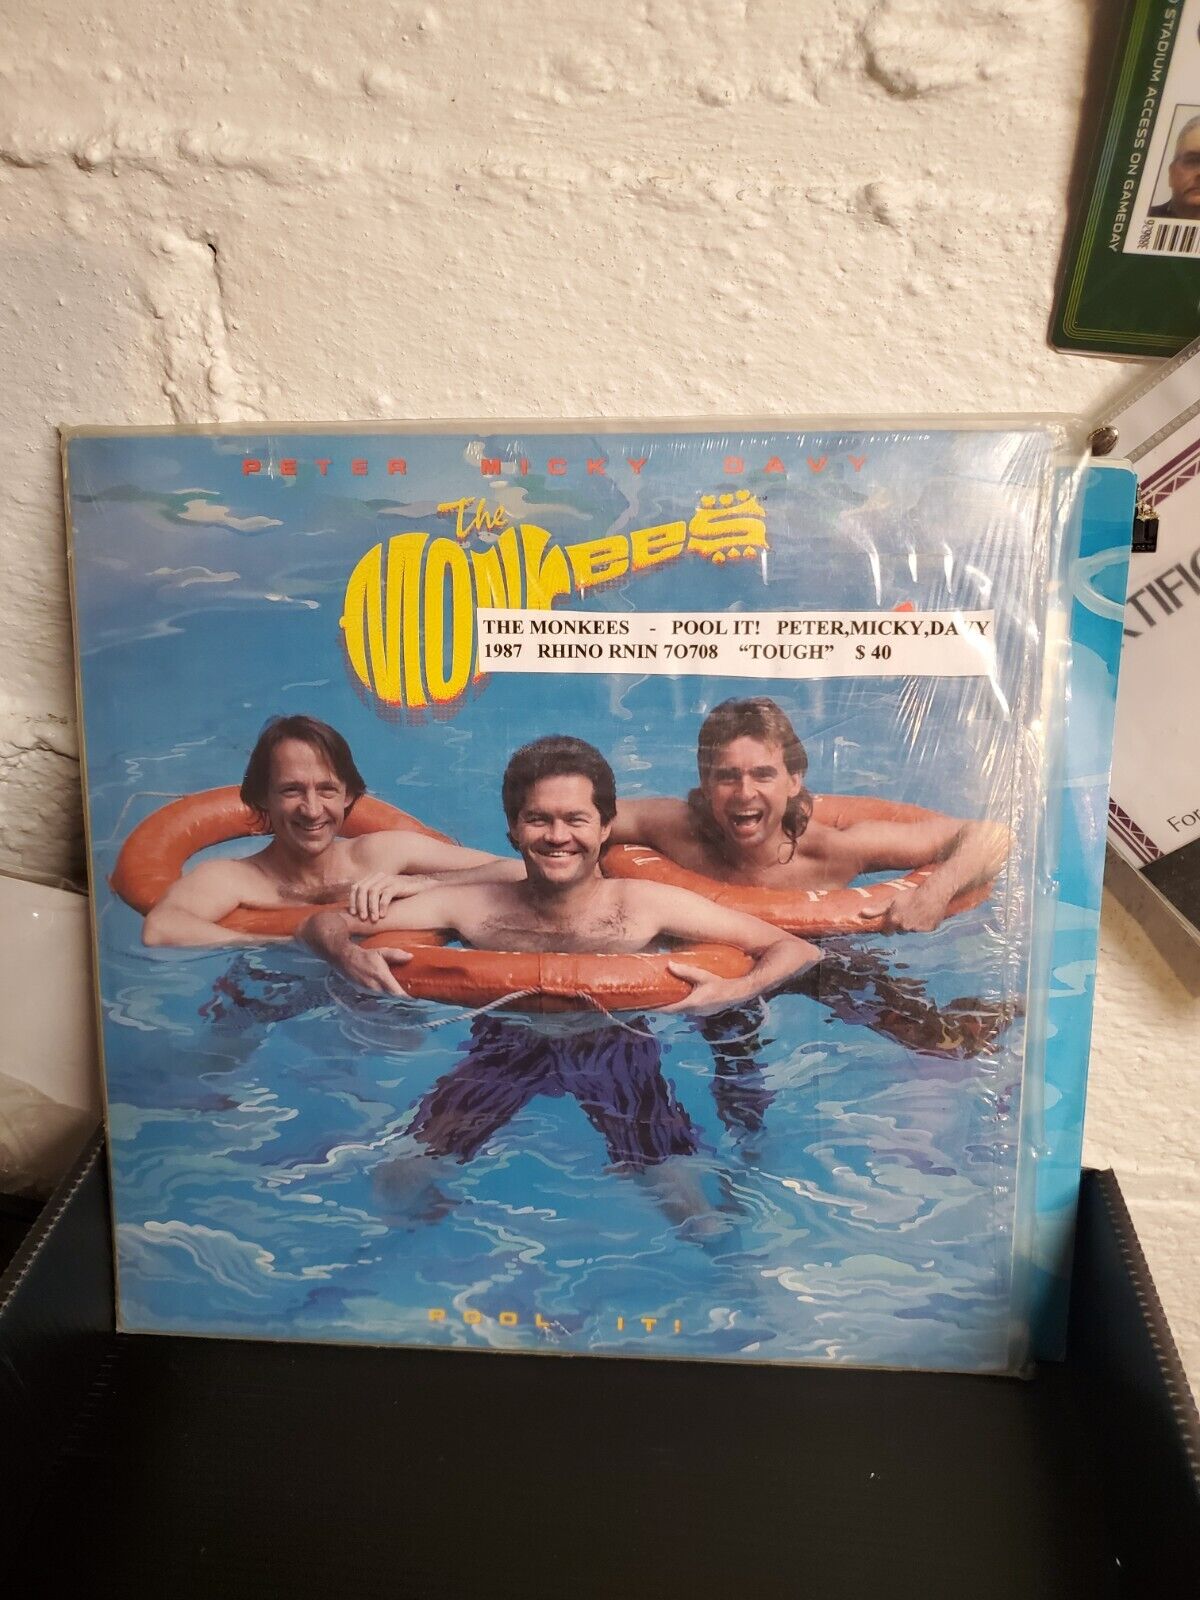 The monkees "Pool It" Rare Lp Record With Rare Inner Sleeve Vintage